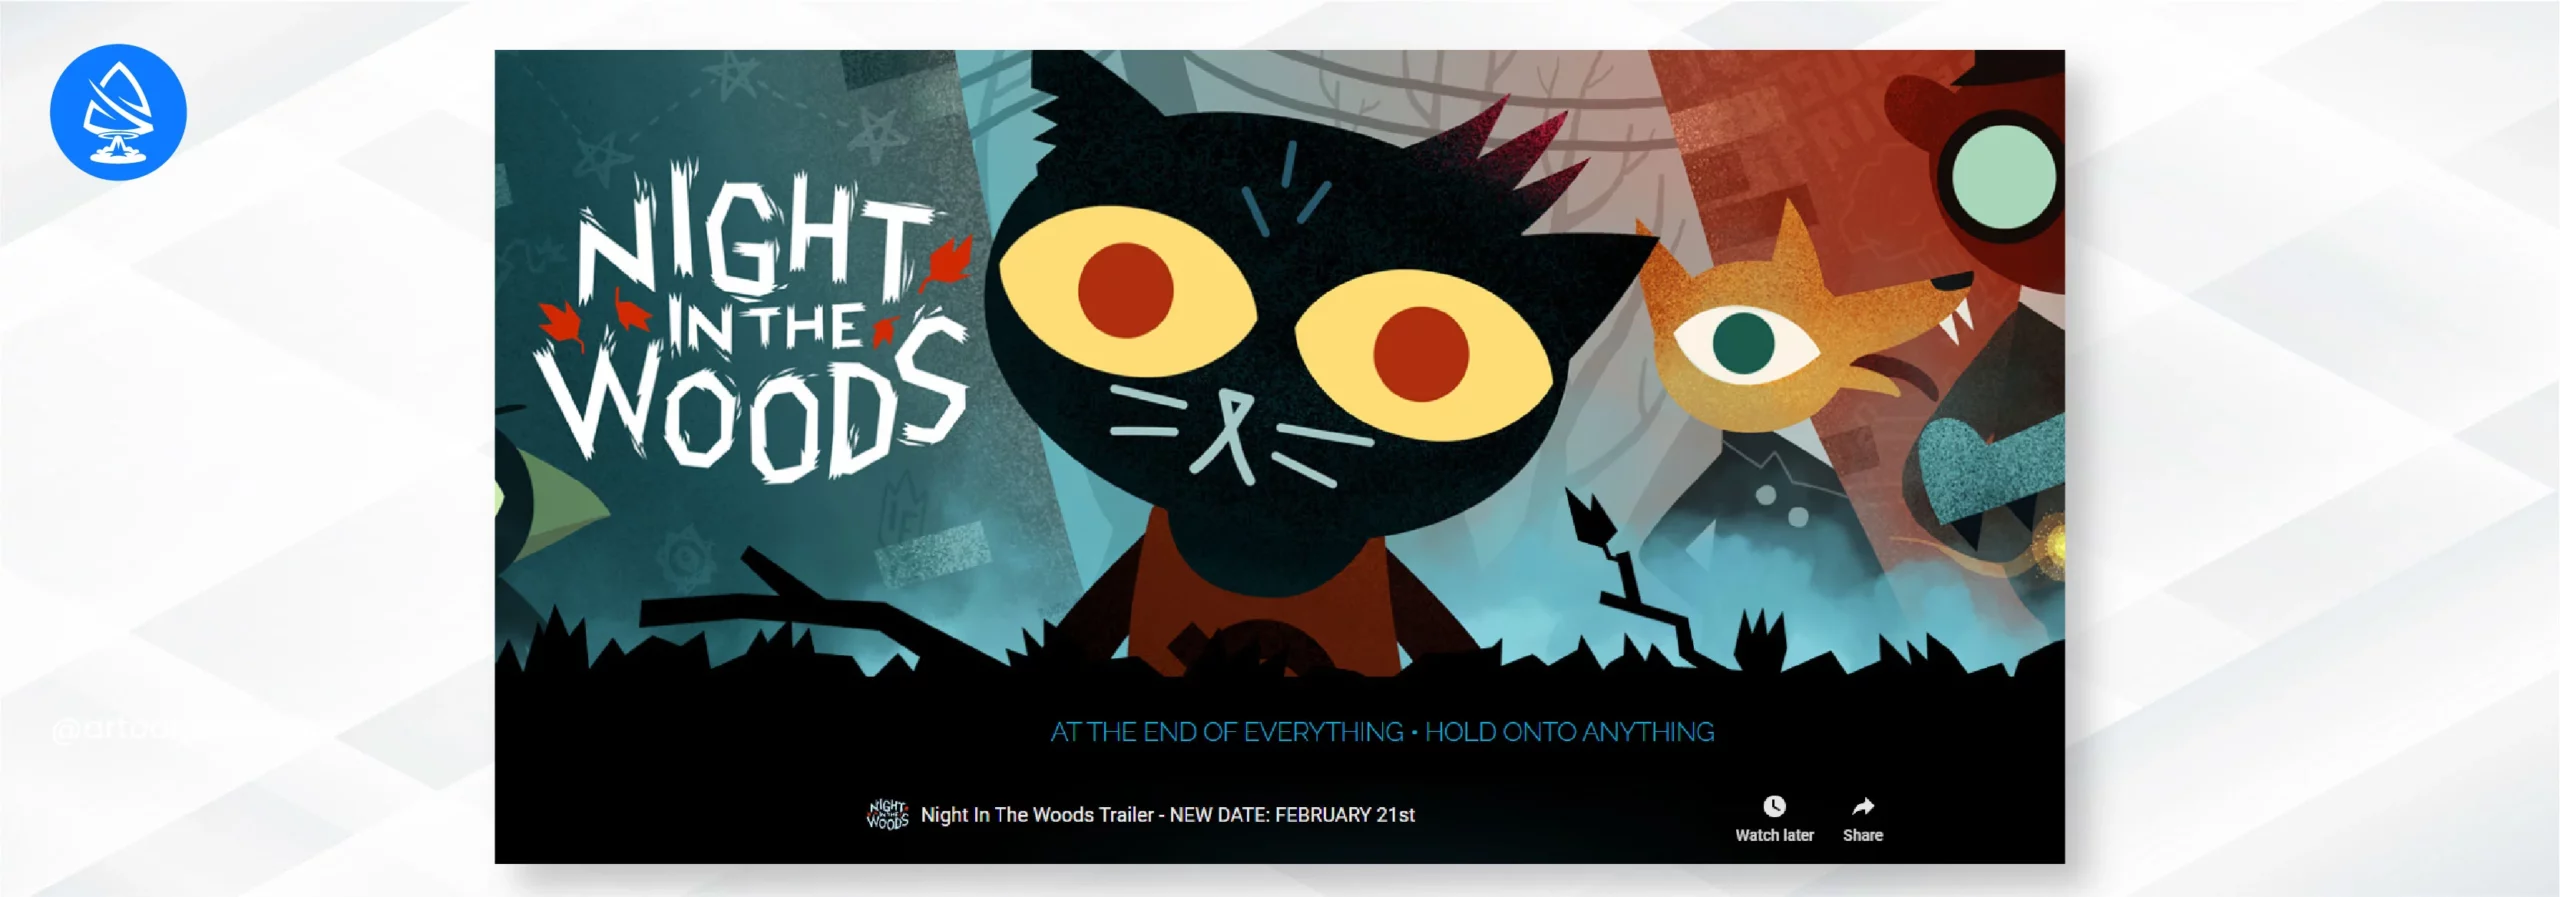 Night In The Woods cool unity 3d games